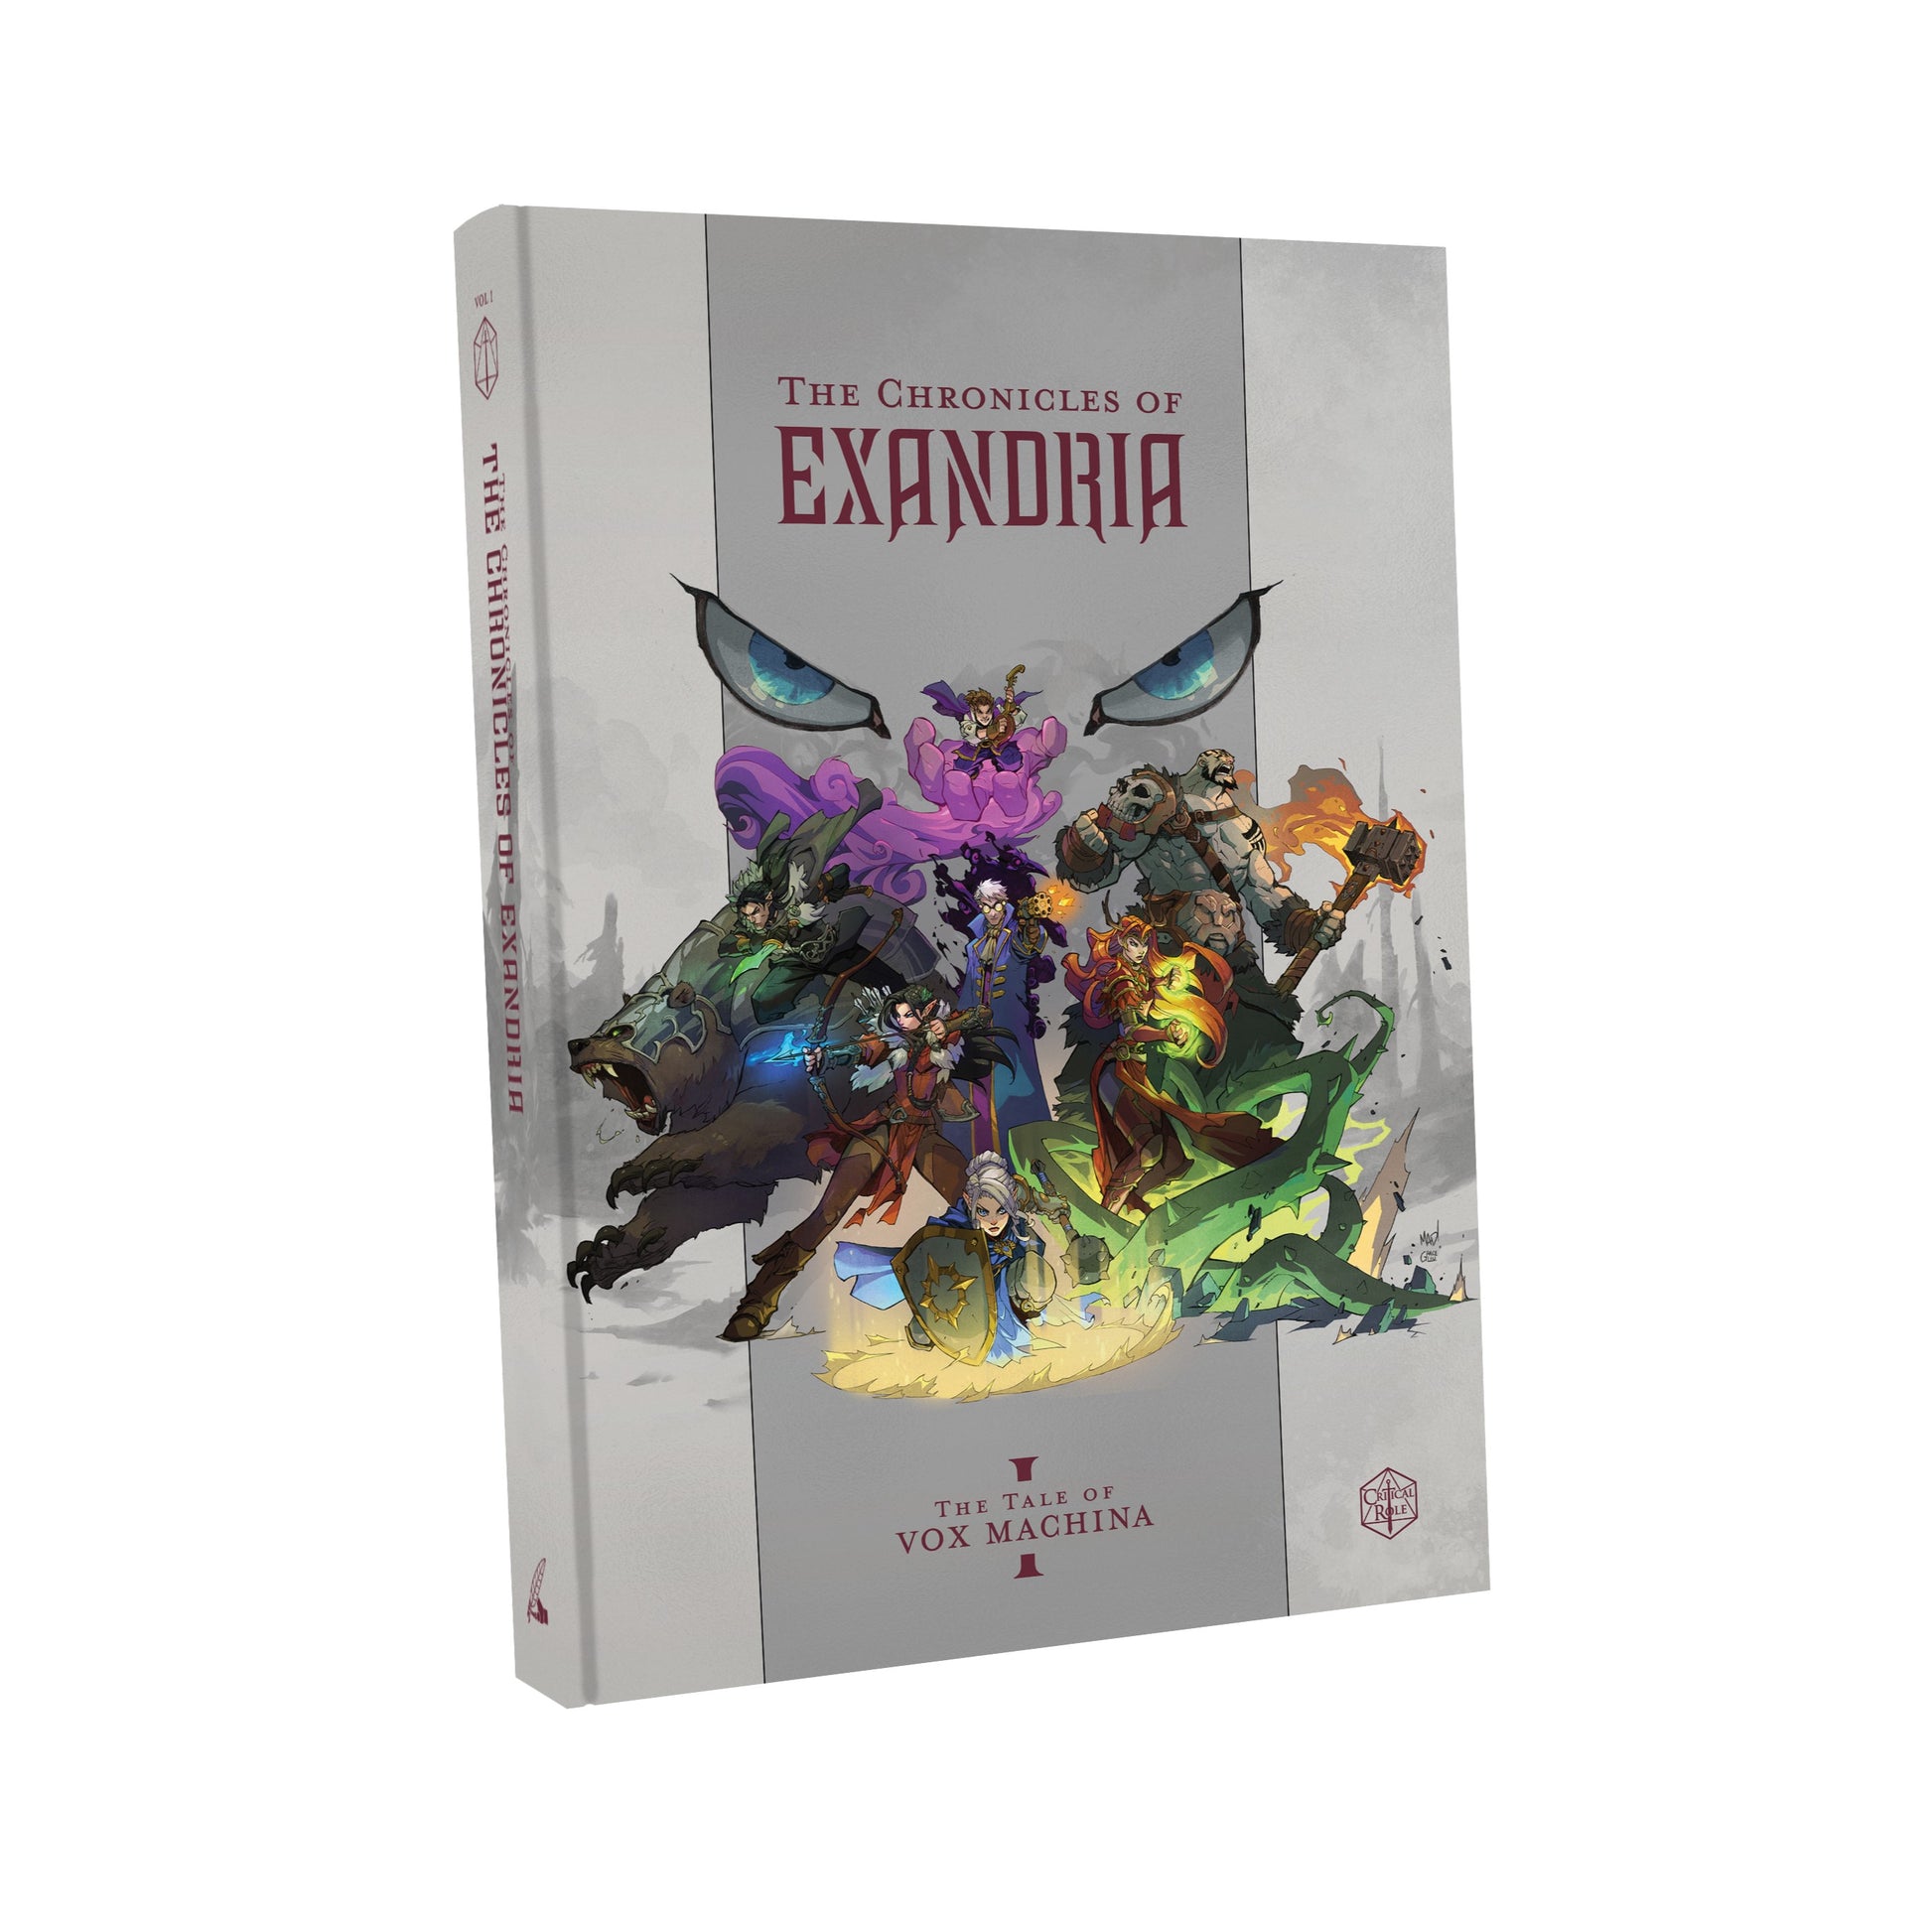 The Chronicles of Exandria Vol. I: The Tale of Vox Machina